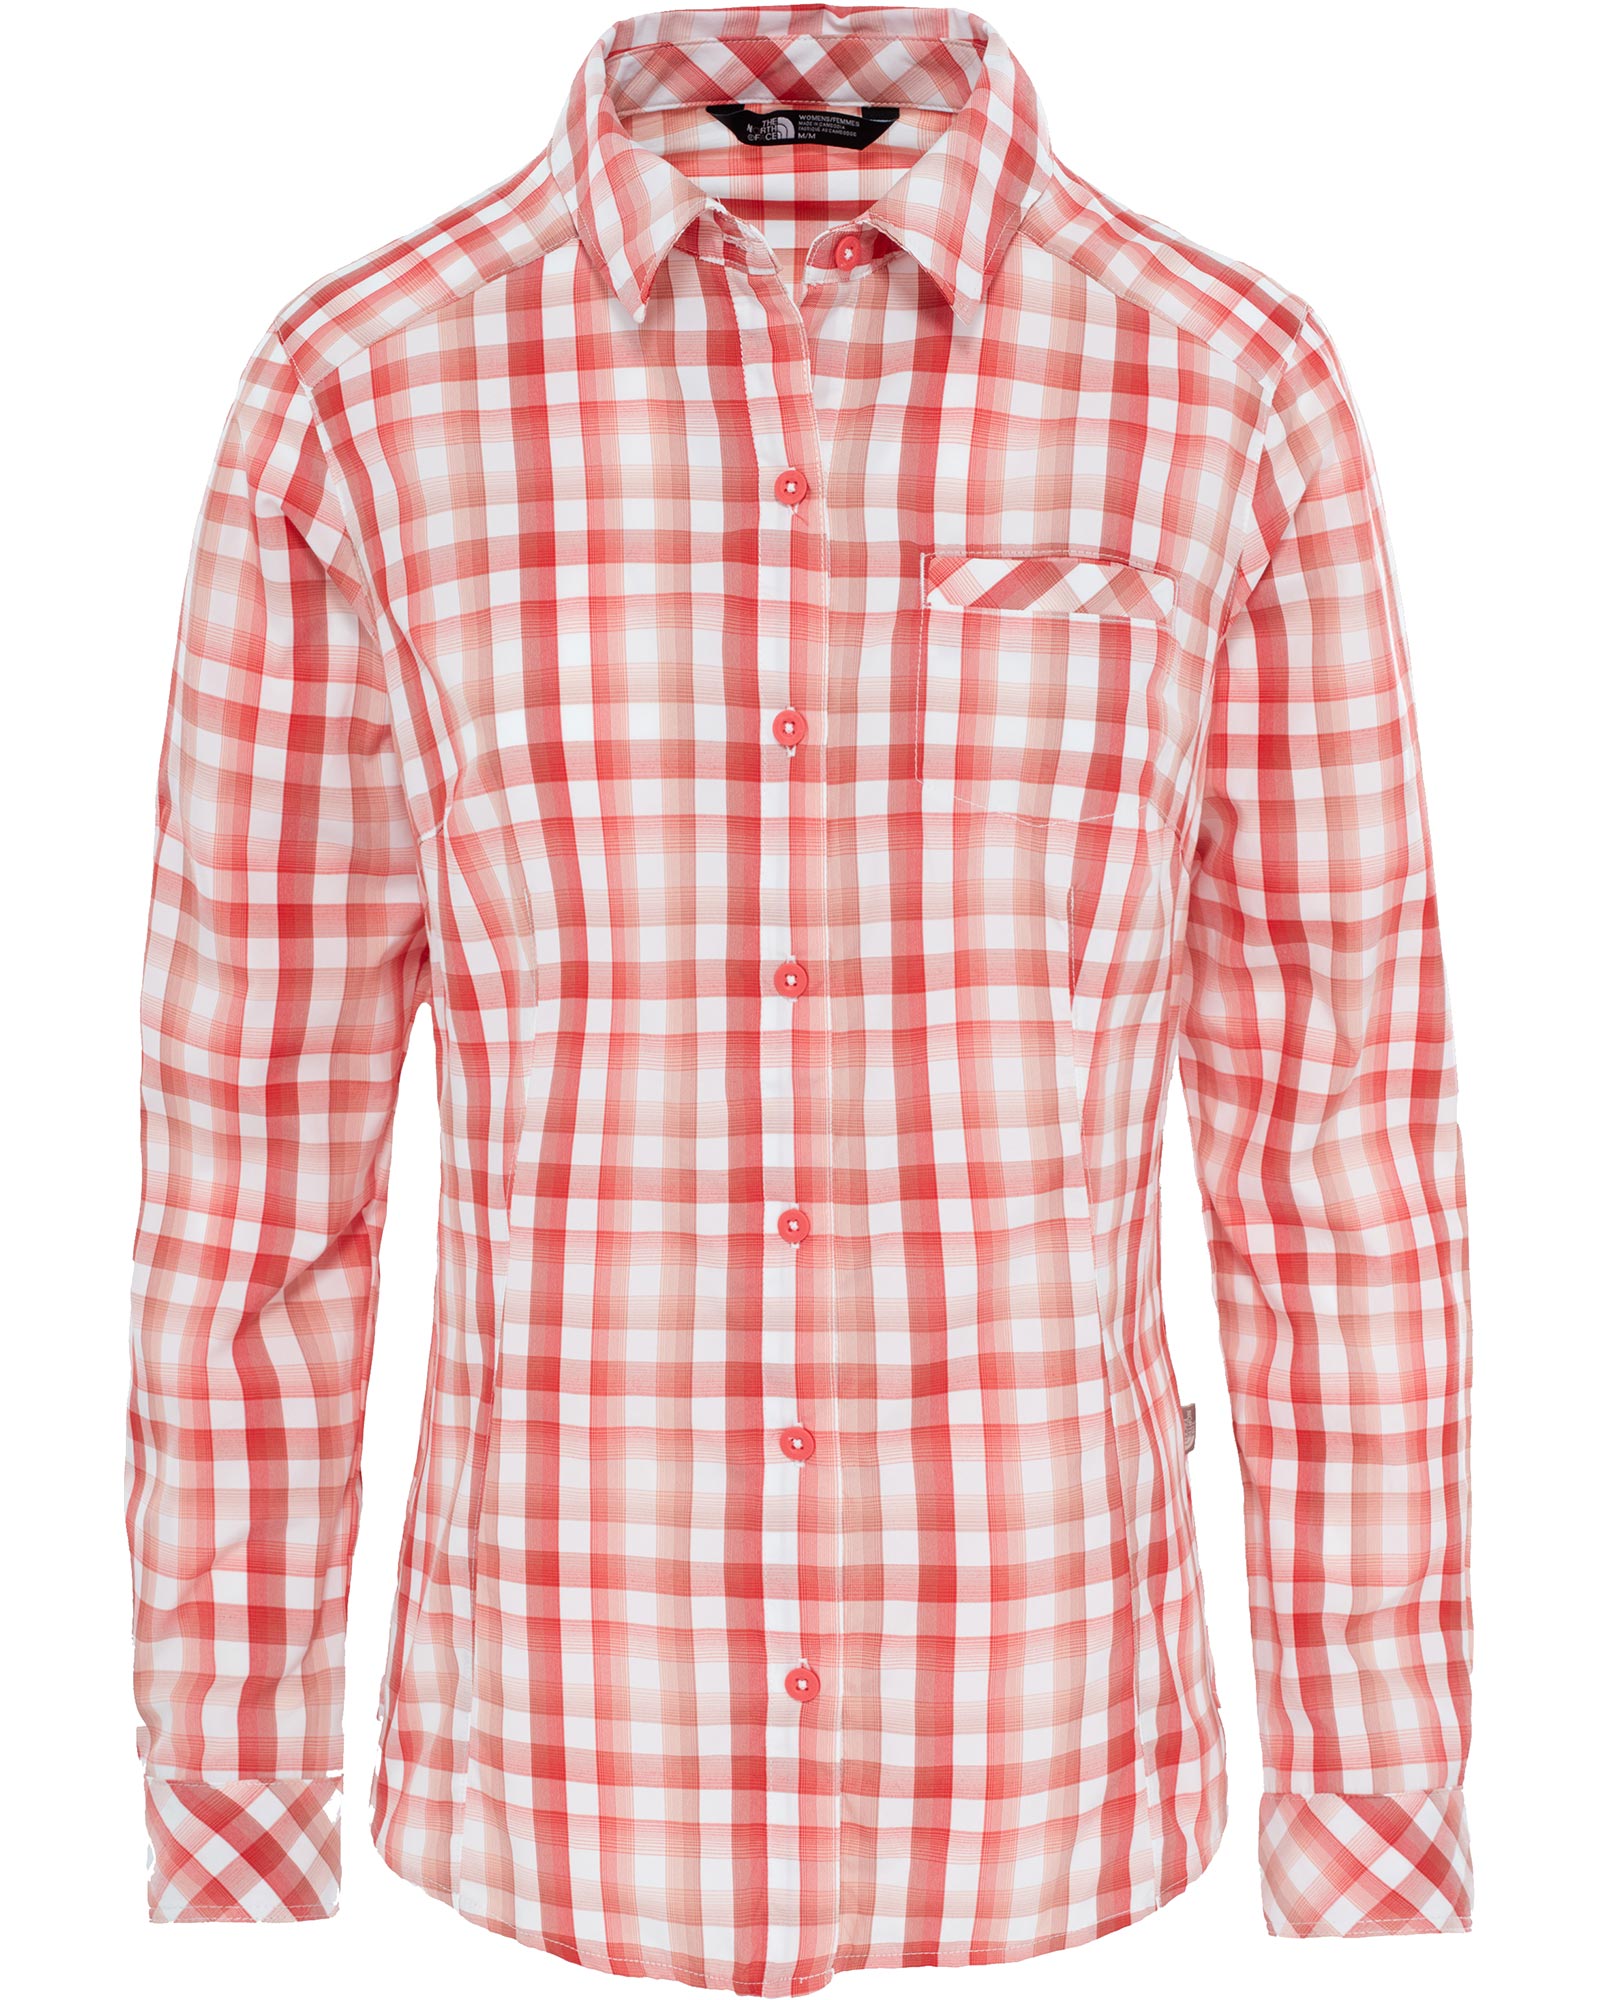 The North Face Zion Women’s Long Sleeve Shirt - Cayenne Red Plaid XS